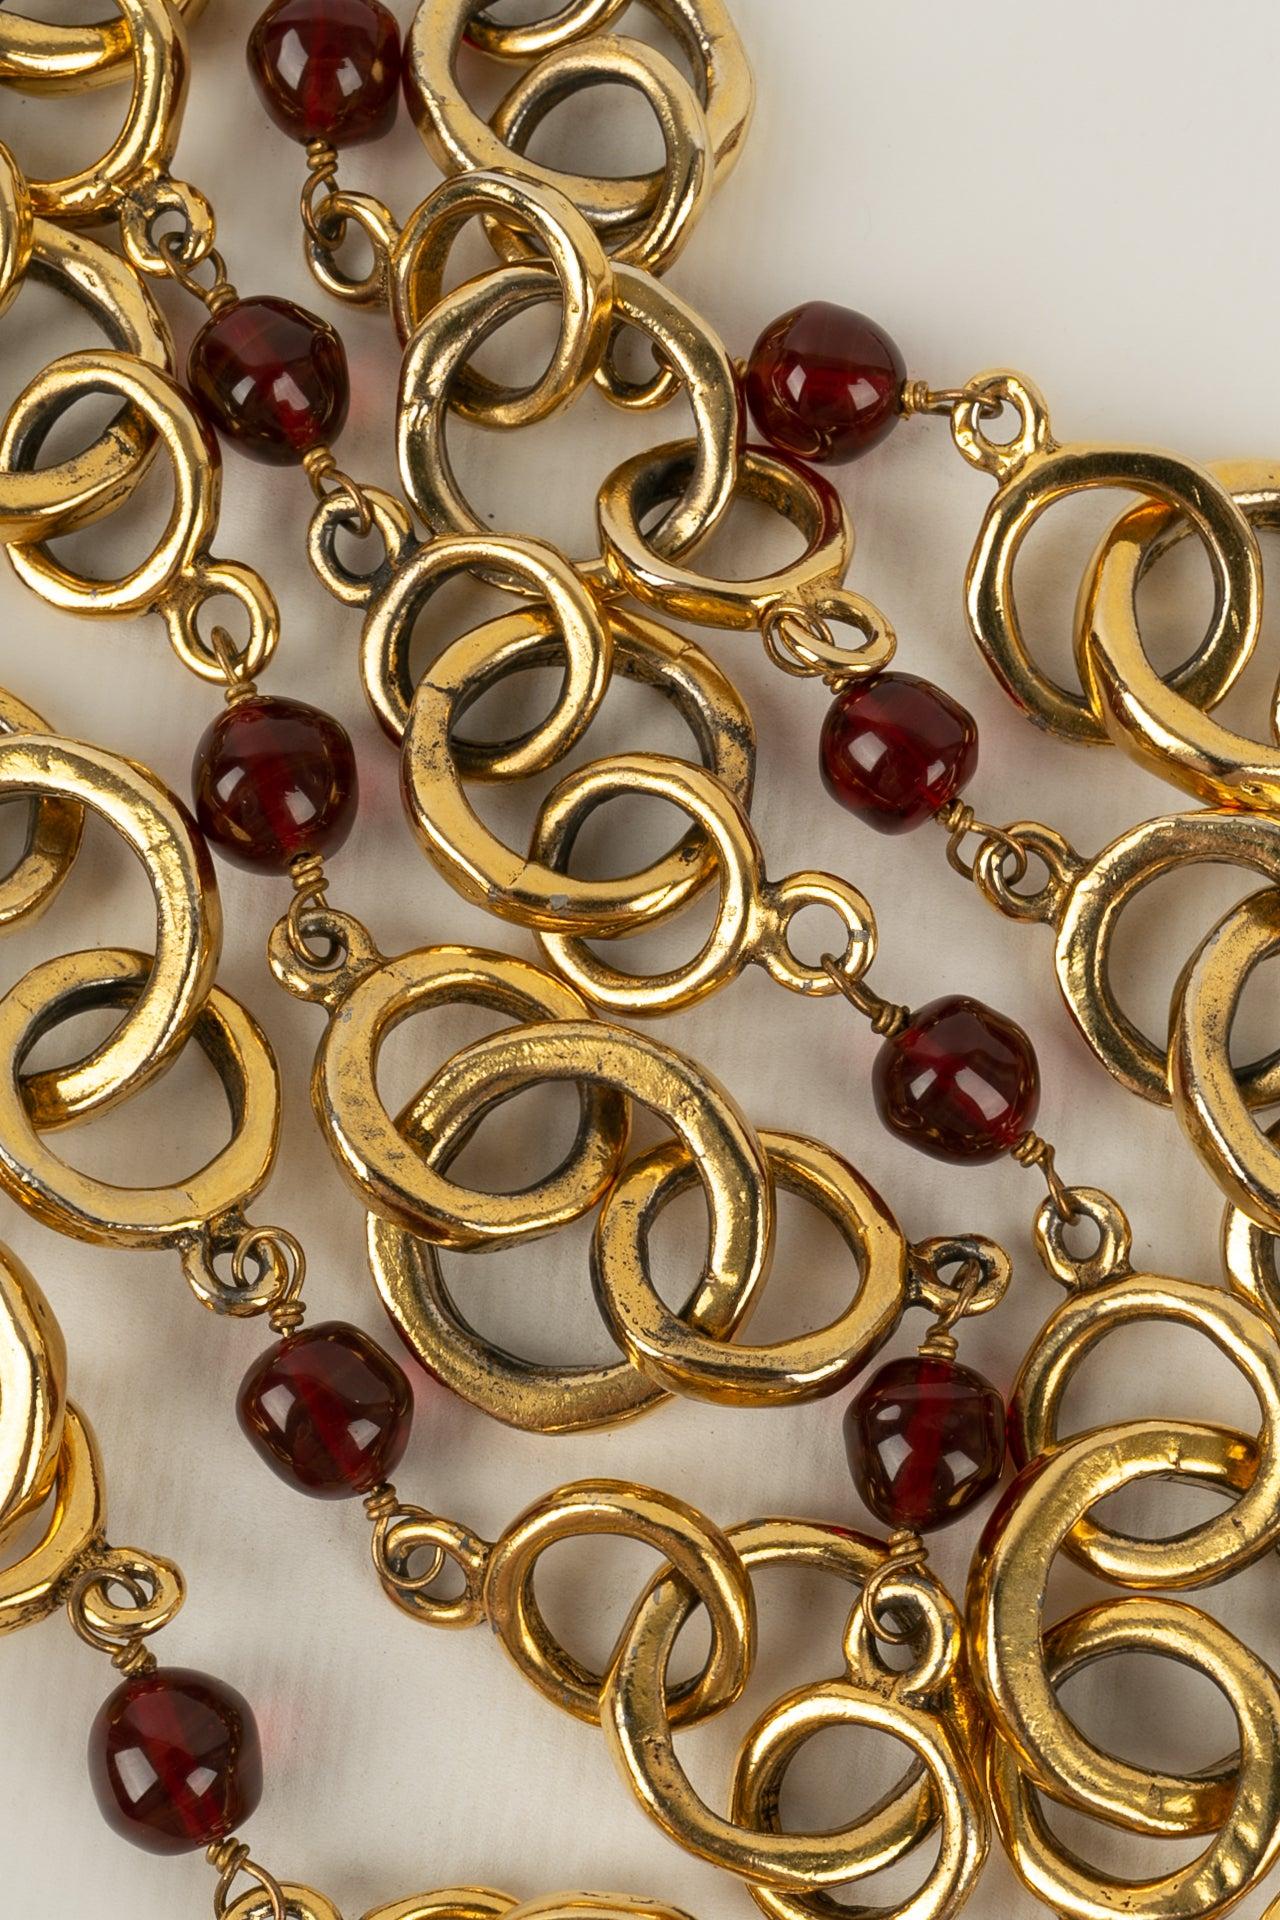 Chanel Long Necklace in Gold Metal and Red Glass Beads, 1984 For Sale 4